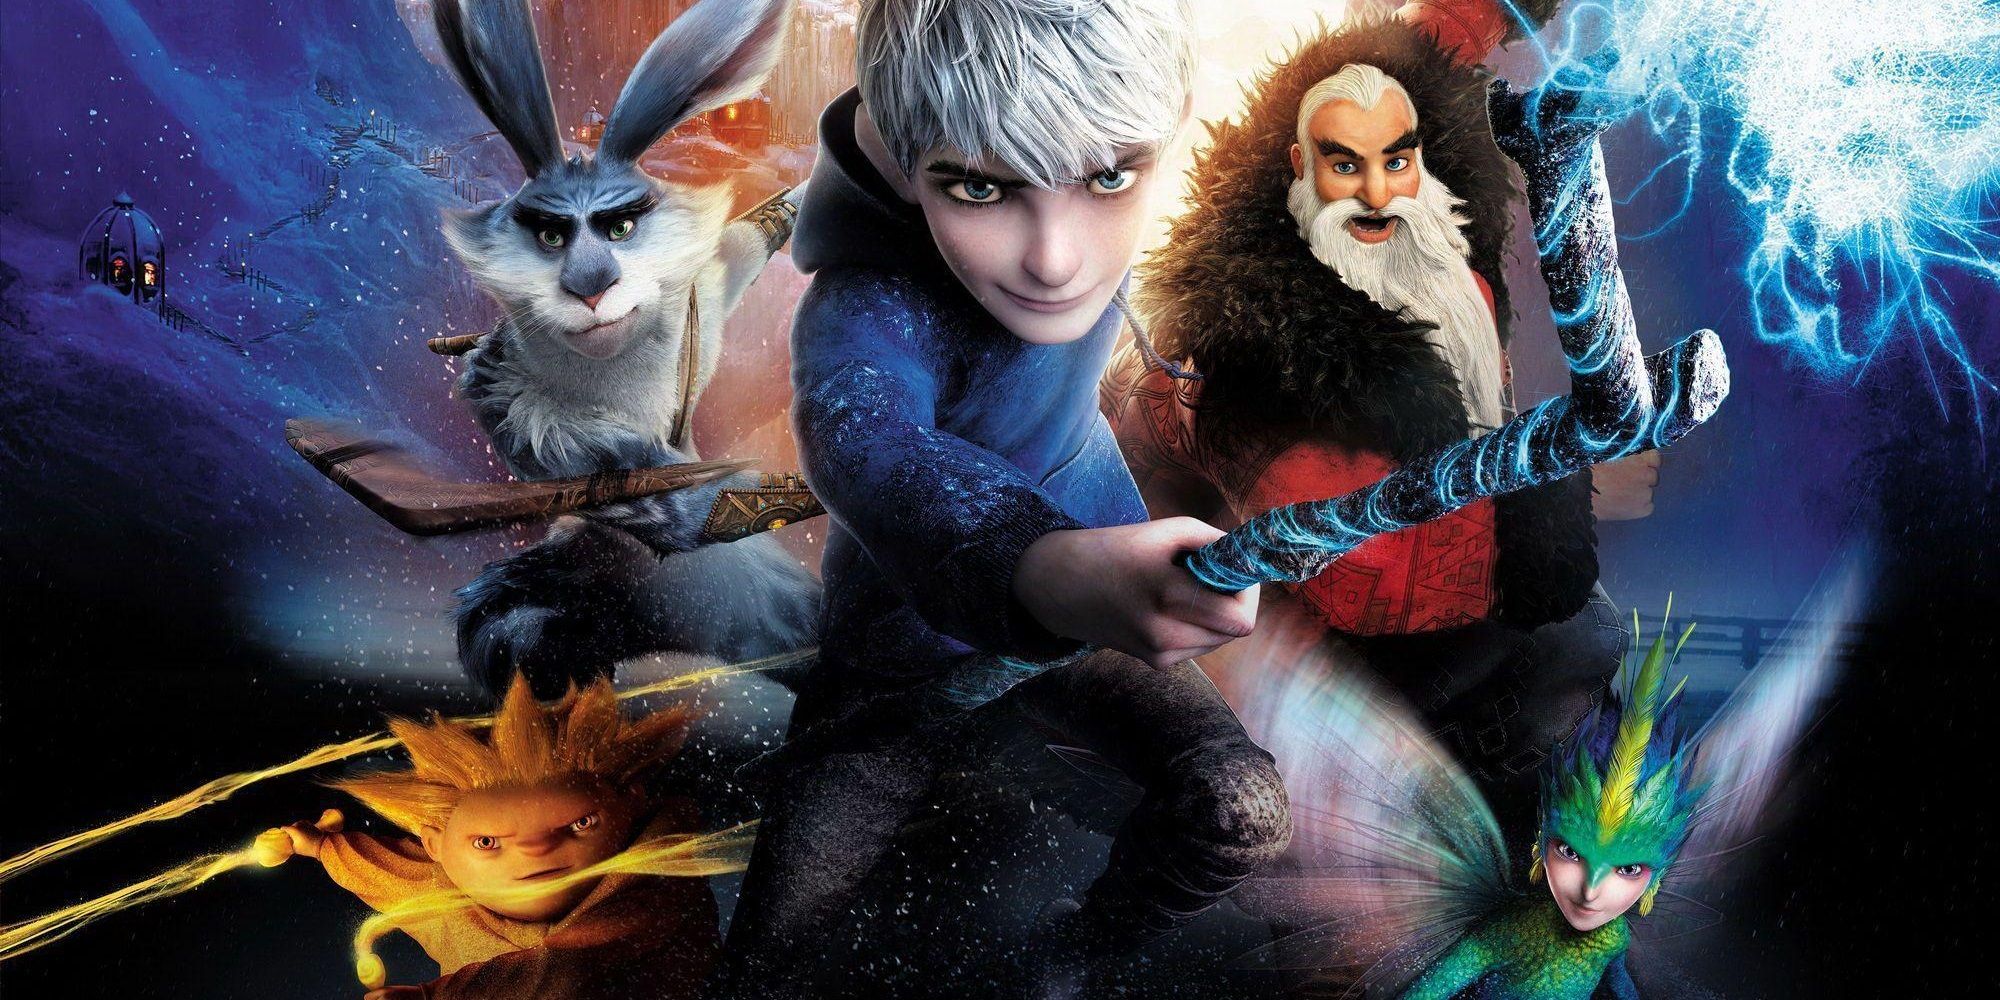 The poster for Rise of the Guardians